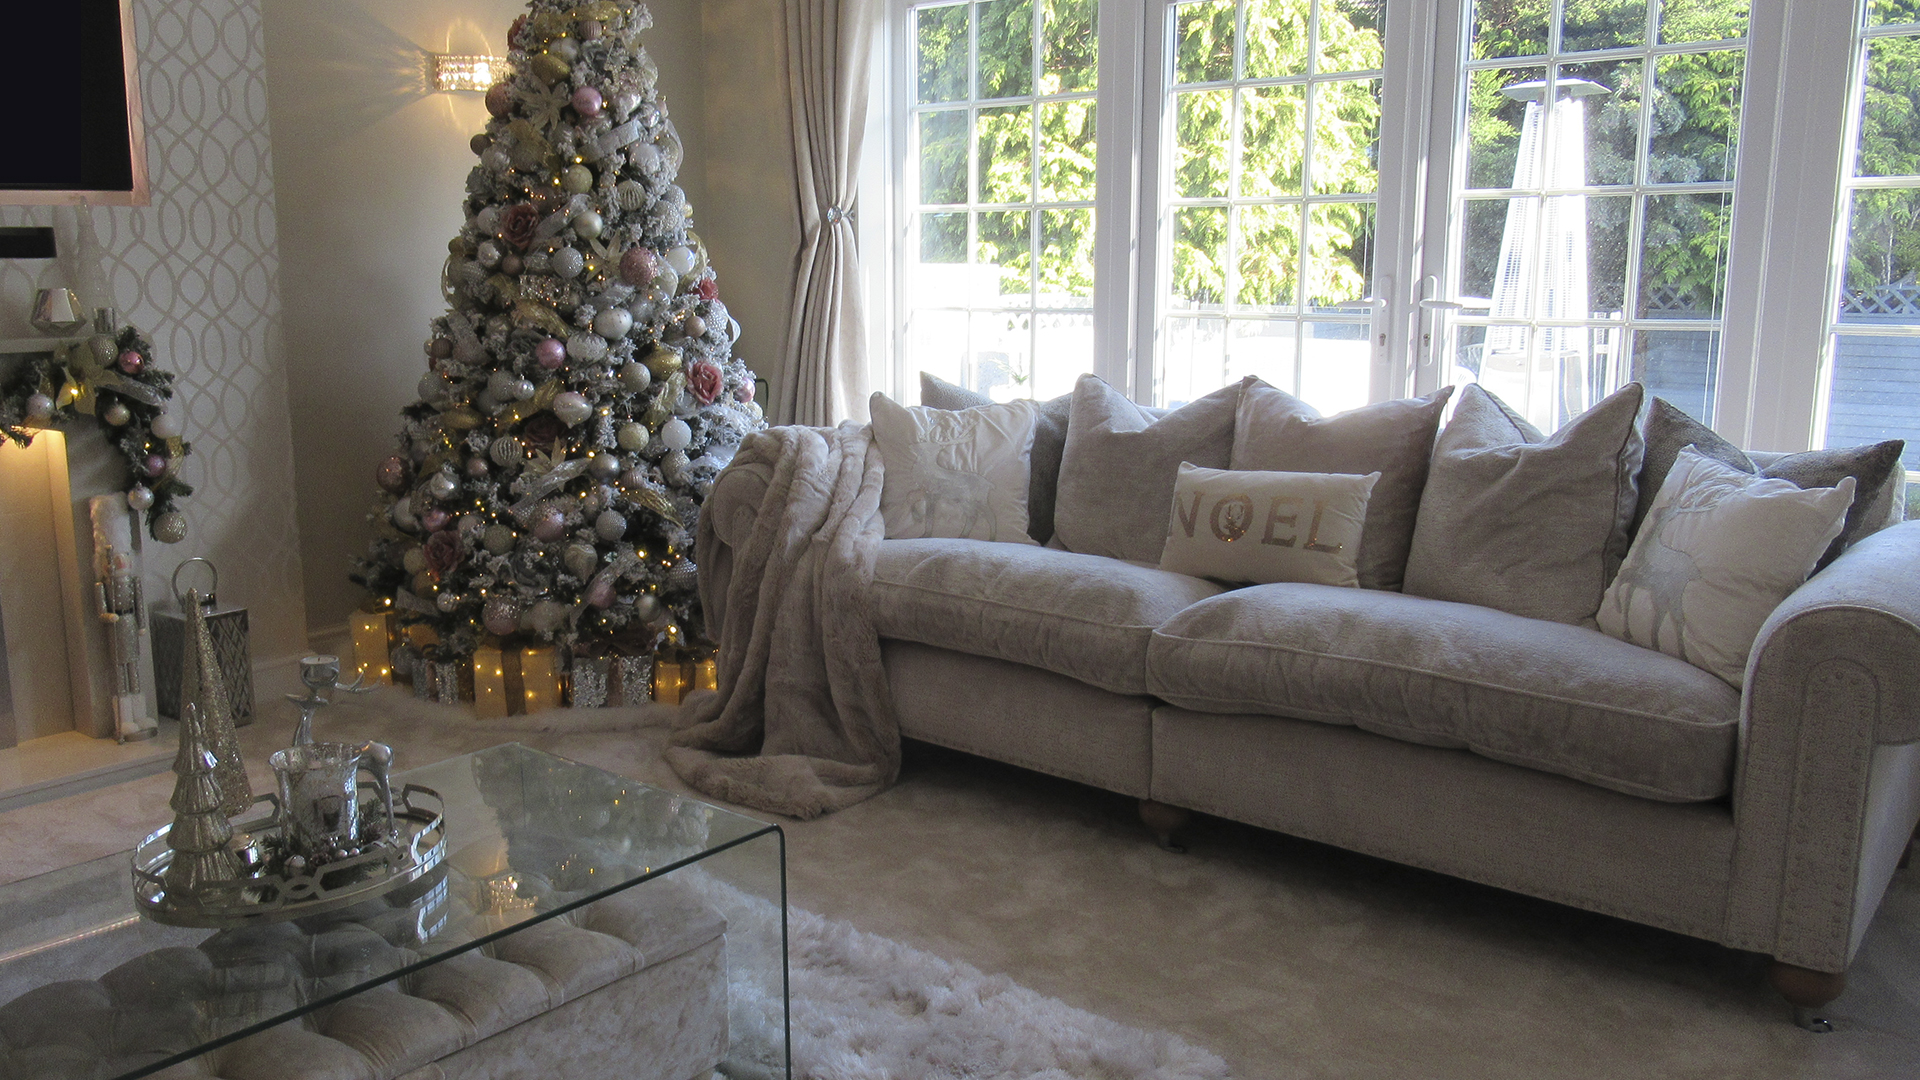 10 ways to make your home feel festive